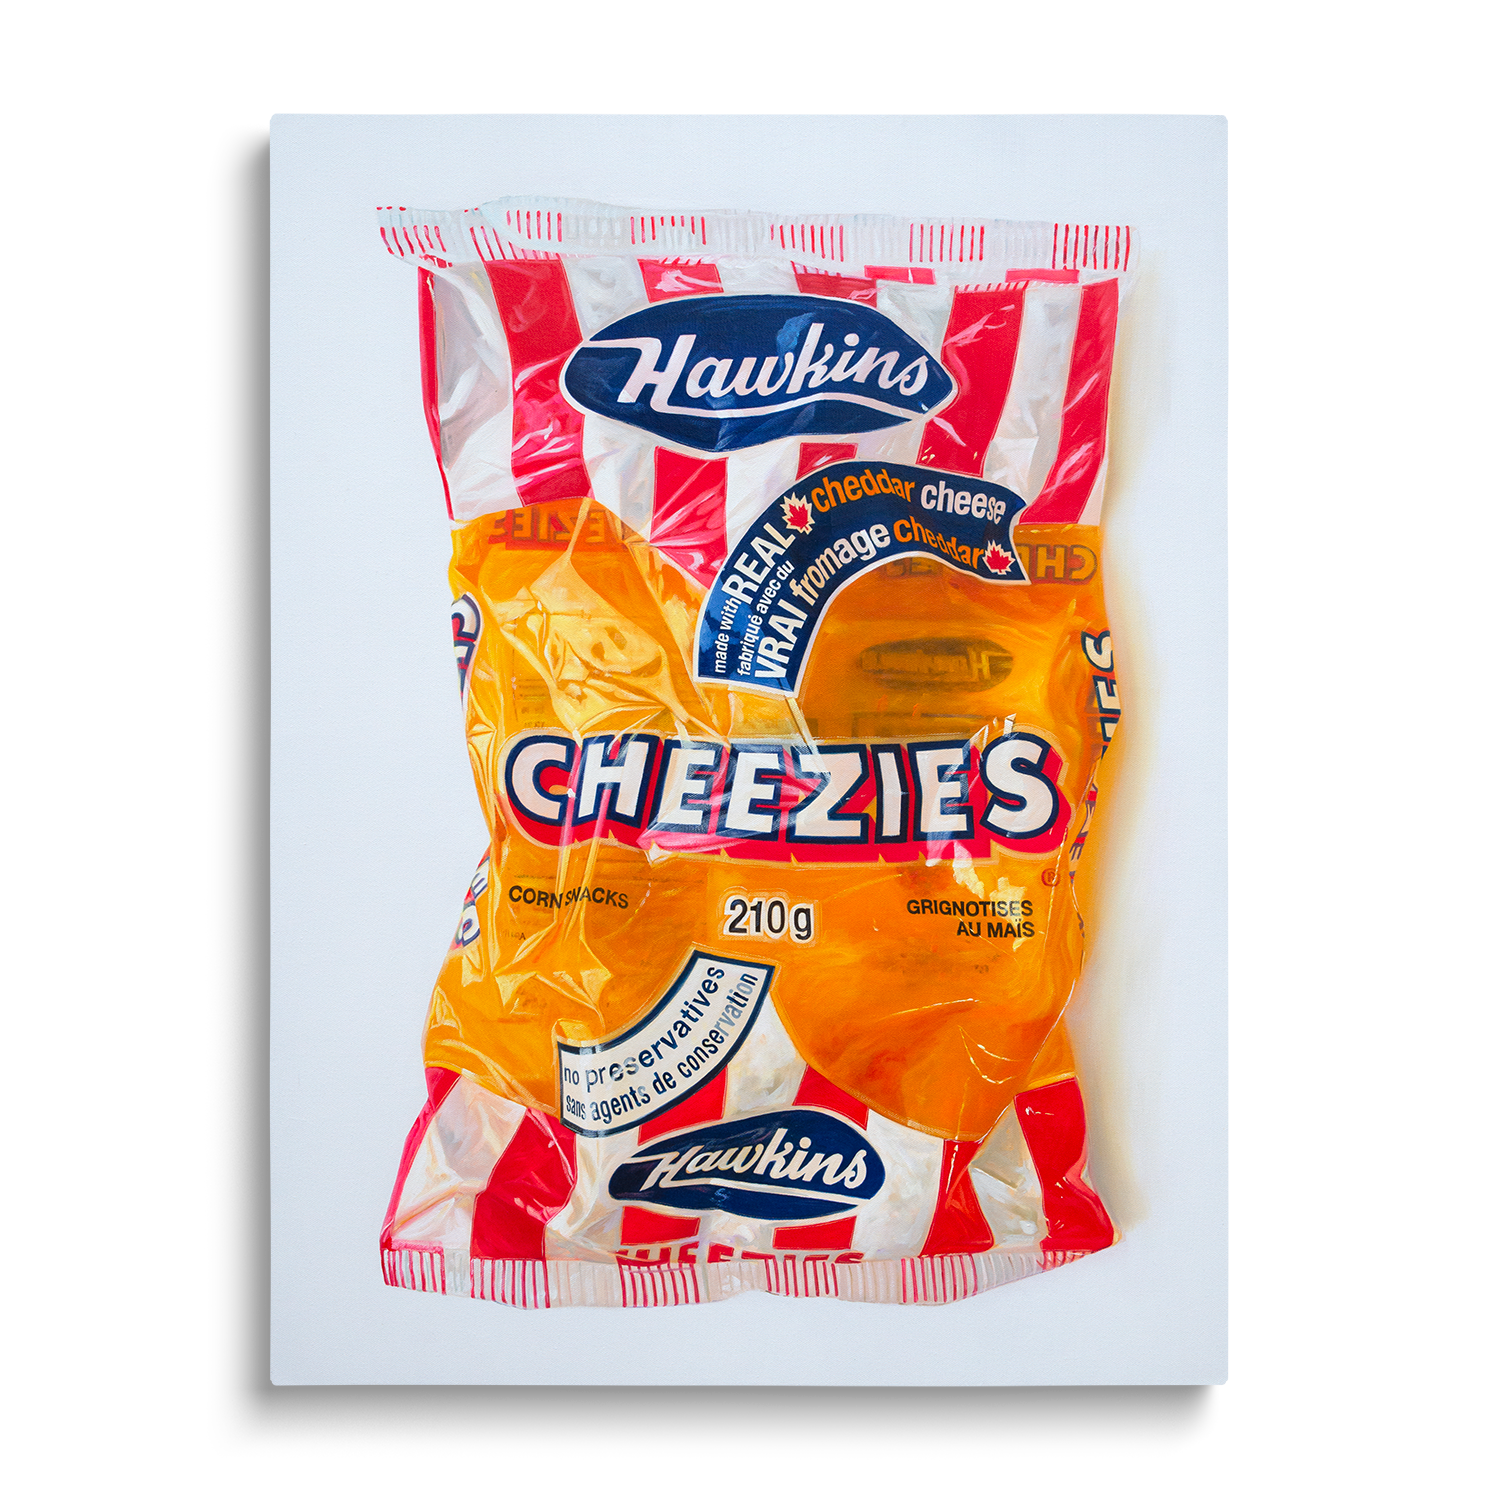 Cheezies Bag No. 13 - Limited Edition Prints